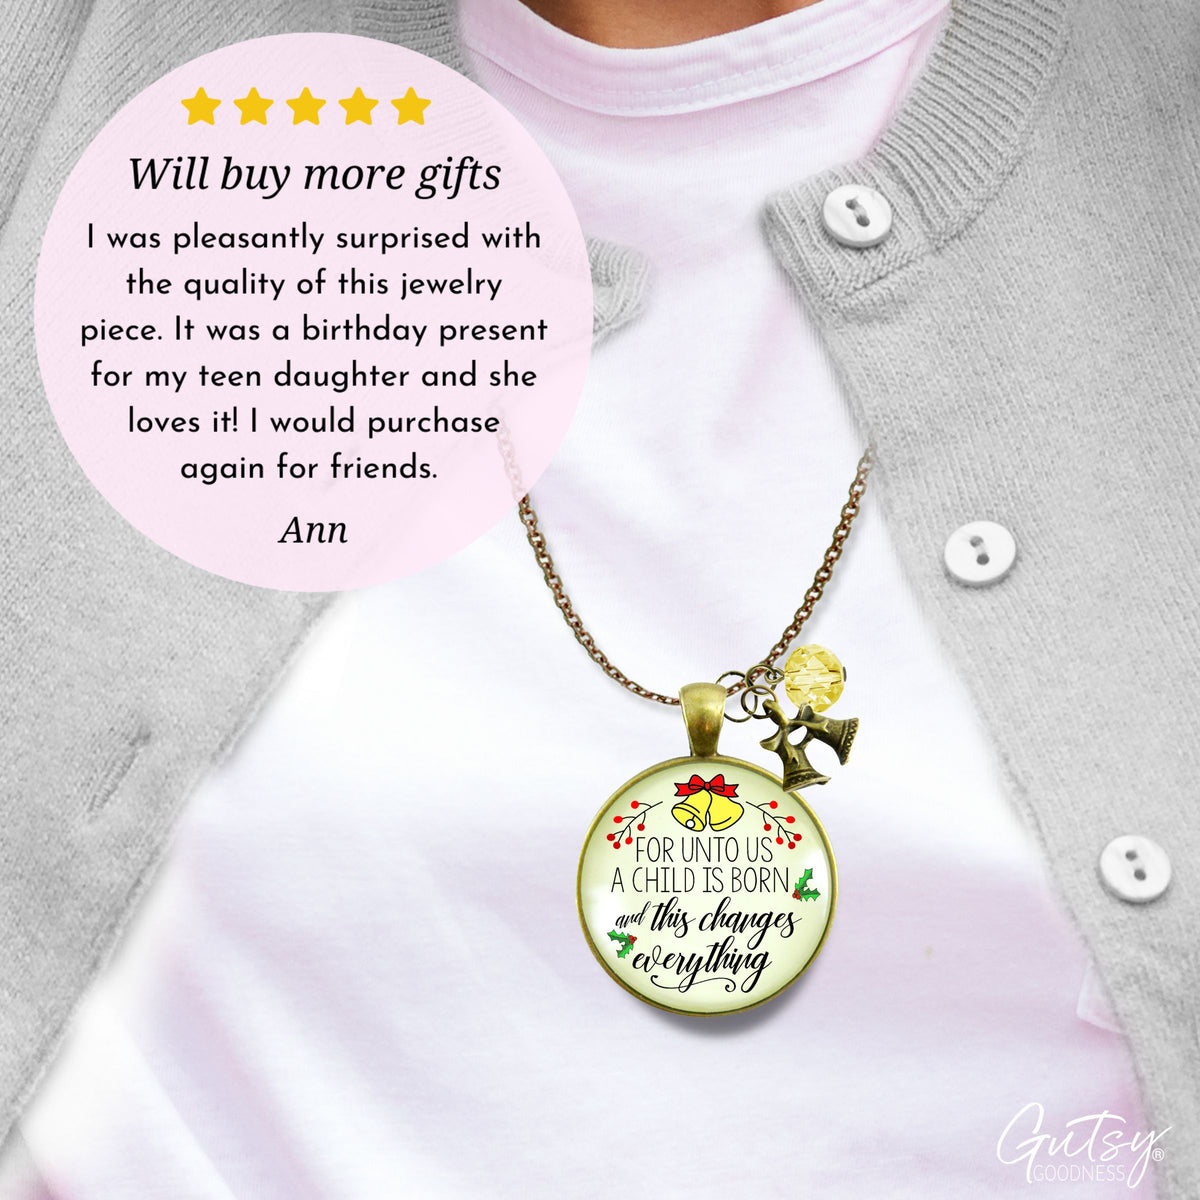 Christmas Jewelry For Women For Unto Us a Child Is Born Charm Necklace Faith Nativity Handmade Pendant  Necklace - Gutsy Goodness Handmade Jewelry